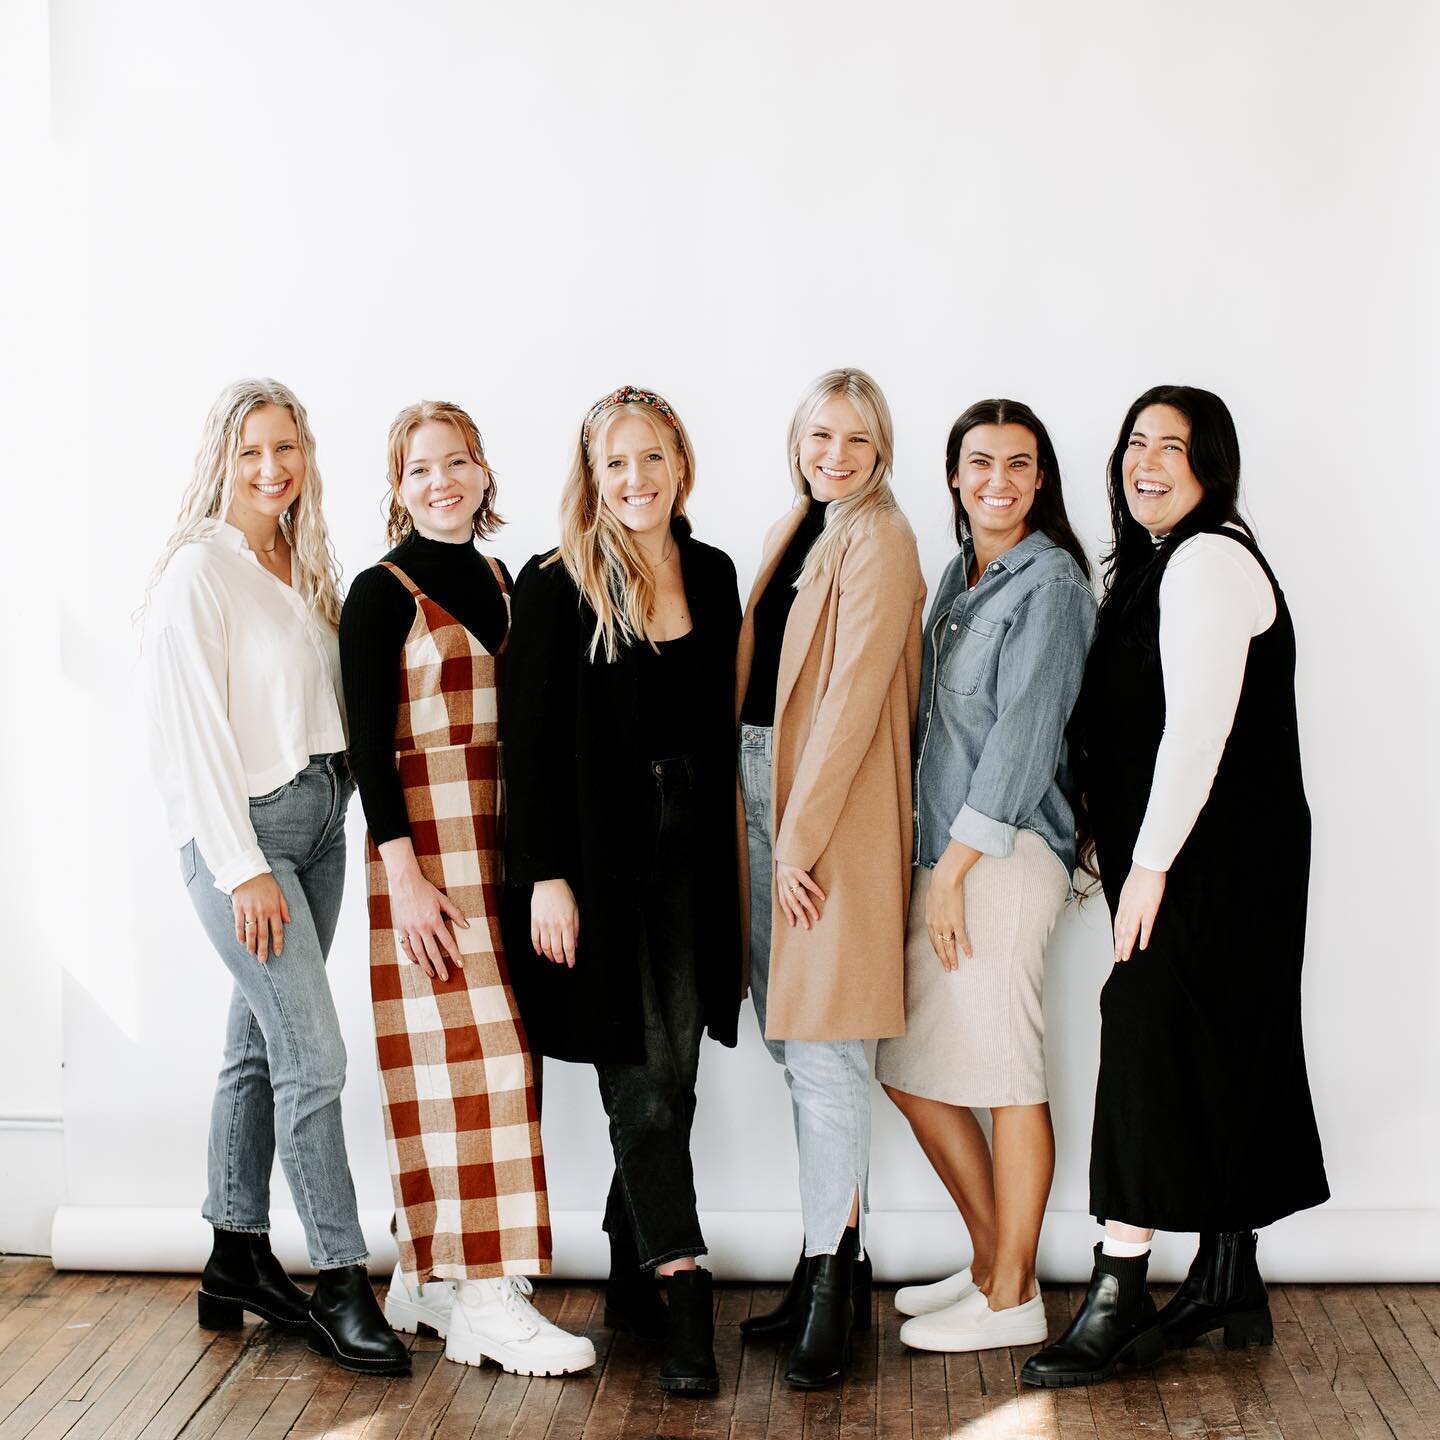 hiiii it&rsquo;s us! meet our 2024 @alinephotoco team, now booking for &lsquo;24. 🥳

we have some familiar faces and some new faces!

from left: madeline, eryndae, ali (our owner / editor @alileighco), hannah, heidi, and kat

a few fun facts: 

made